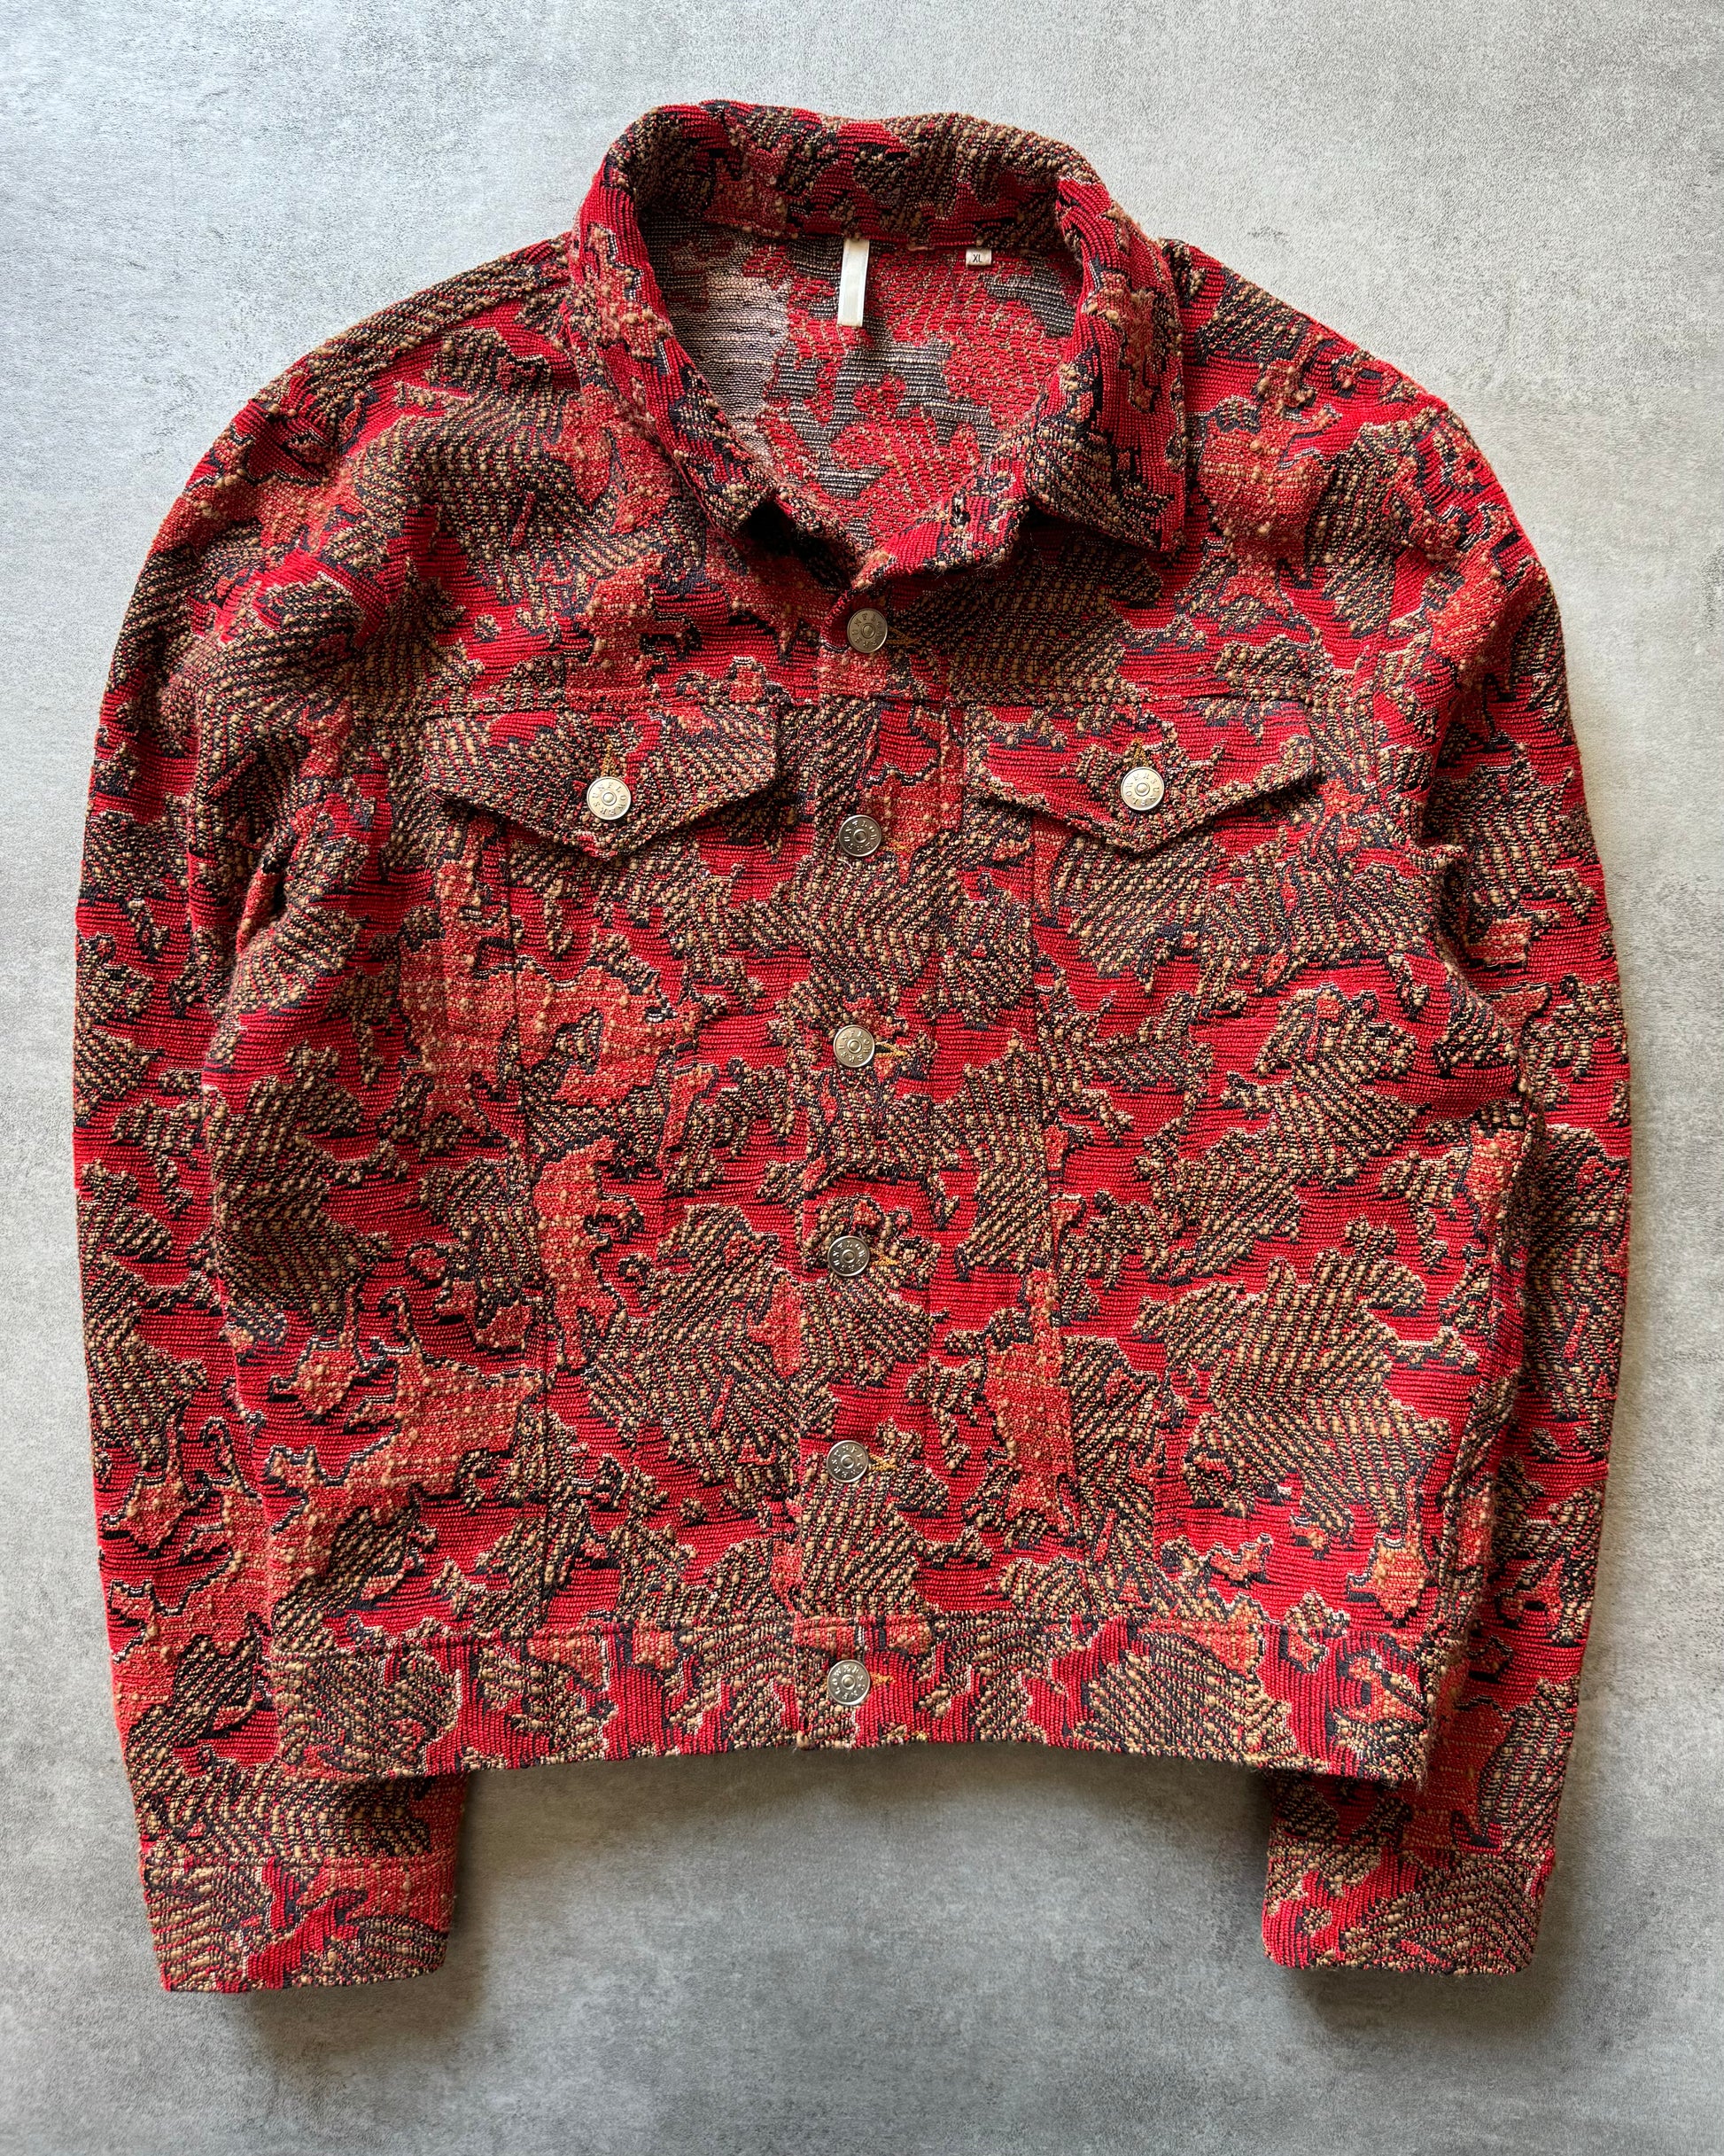 SS2020 Sunflower Red Jacquard Jacket  (L) - 1